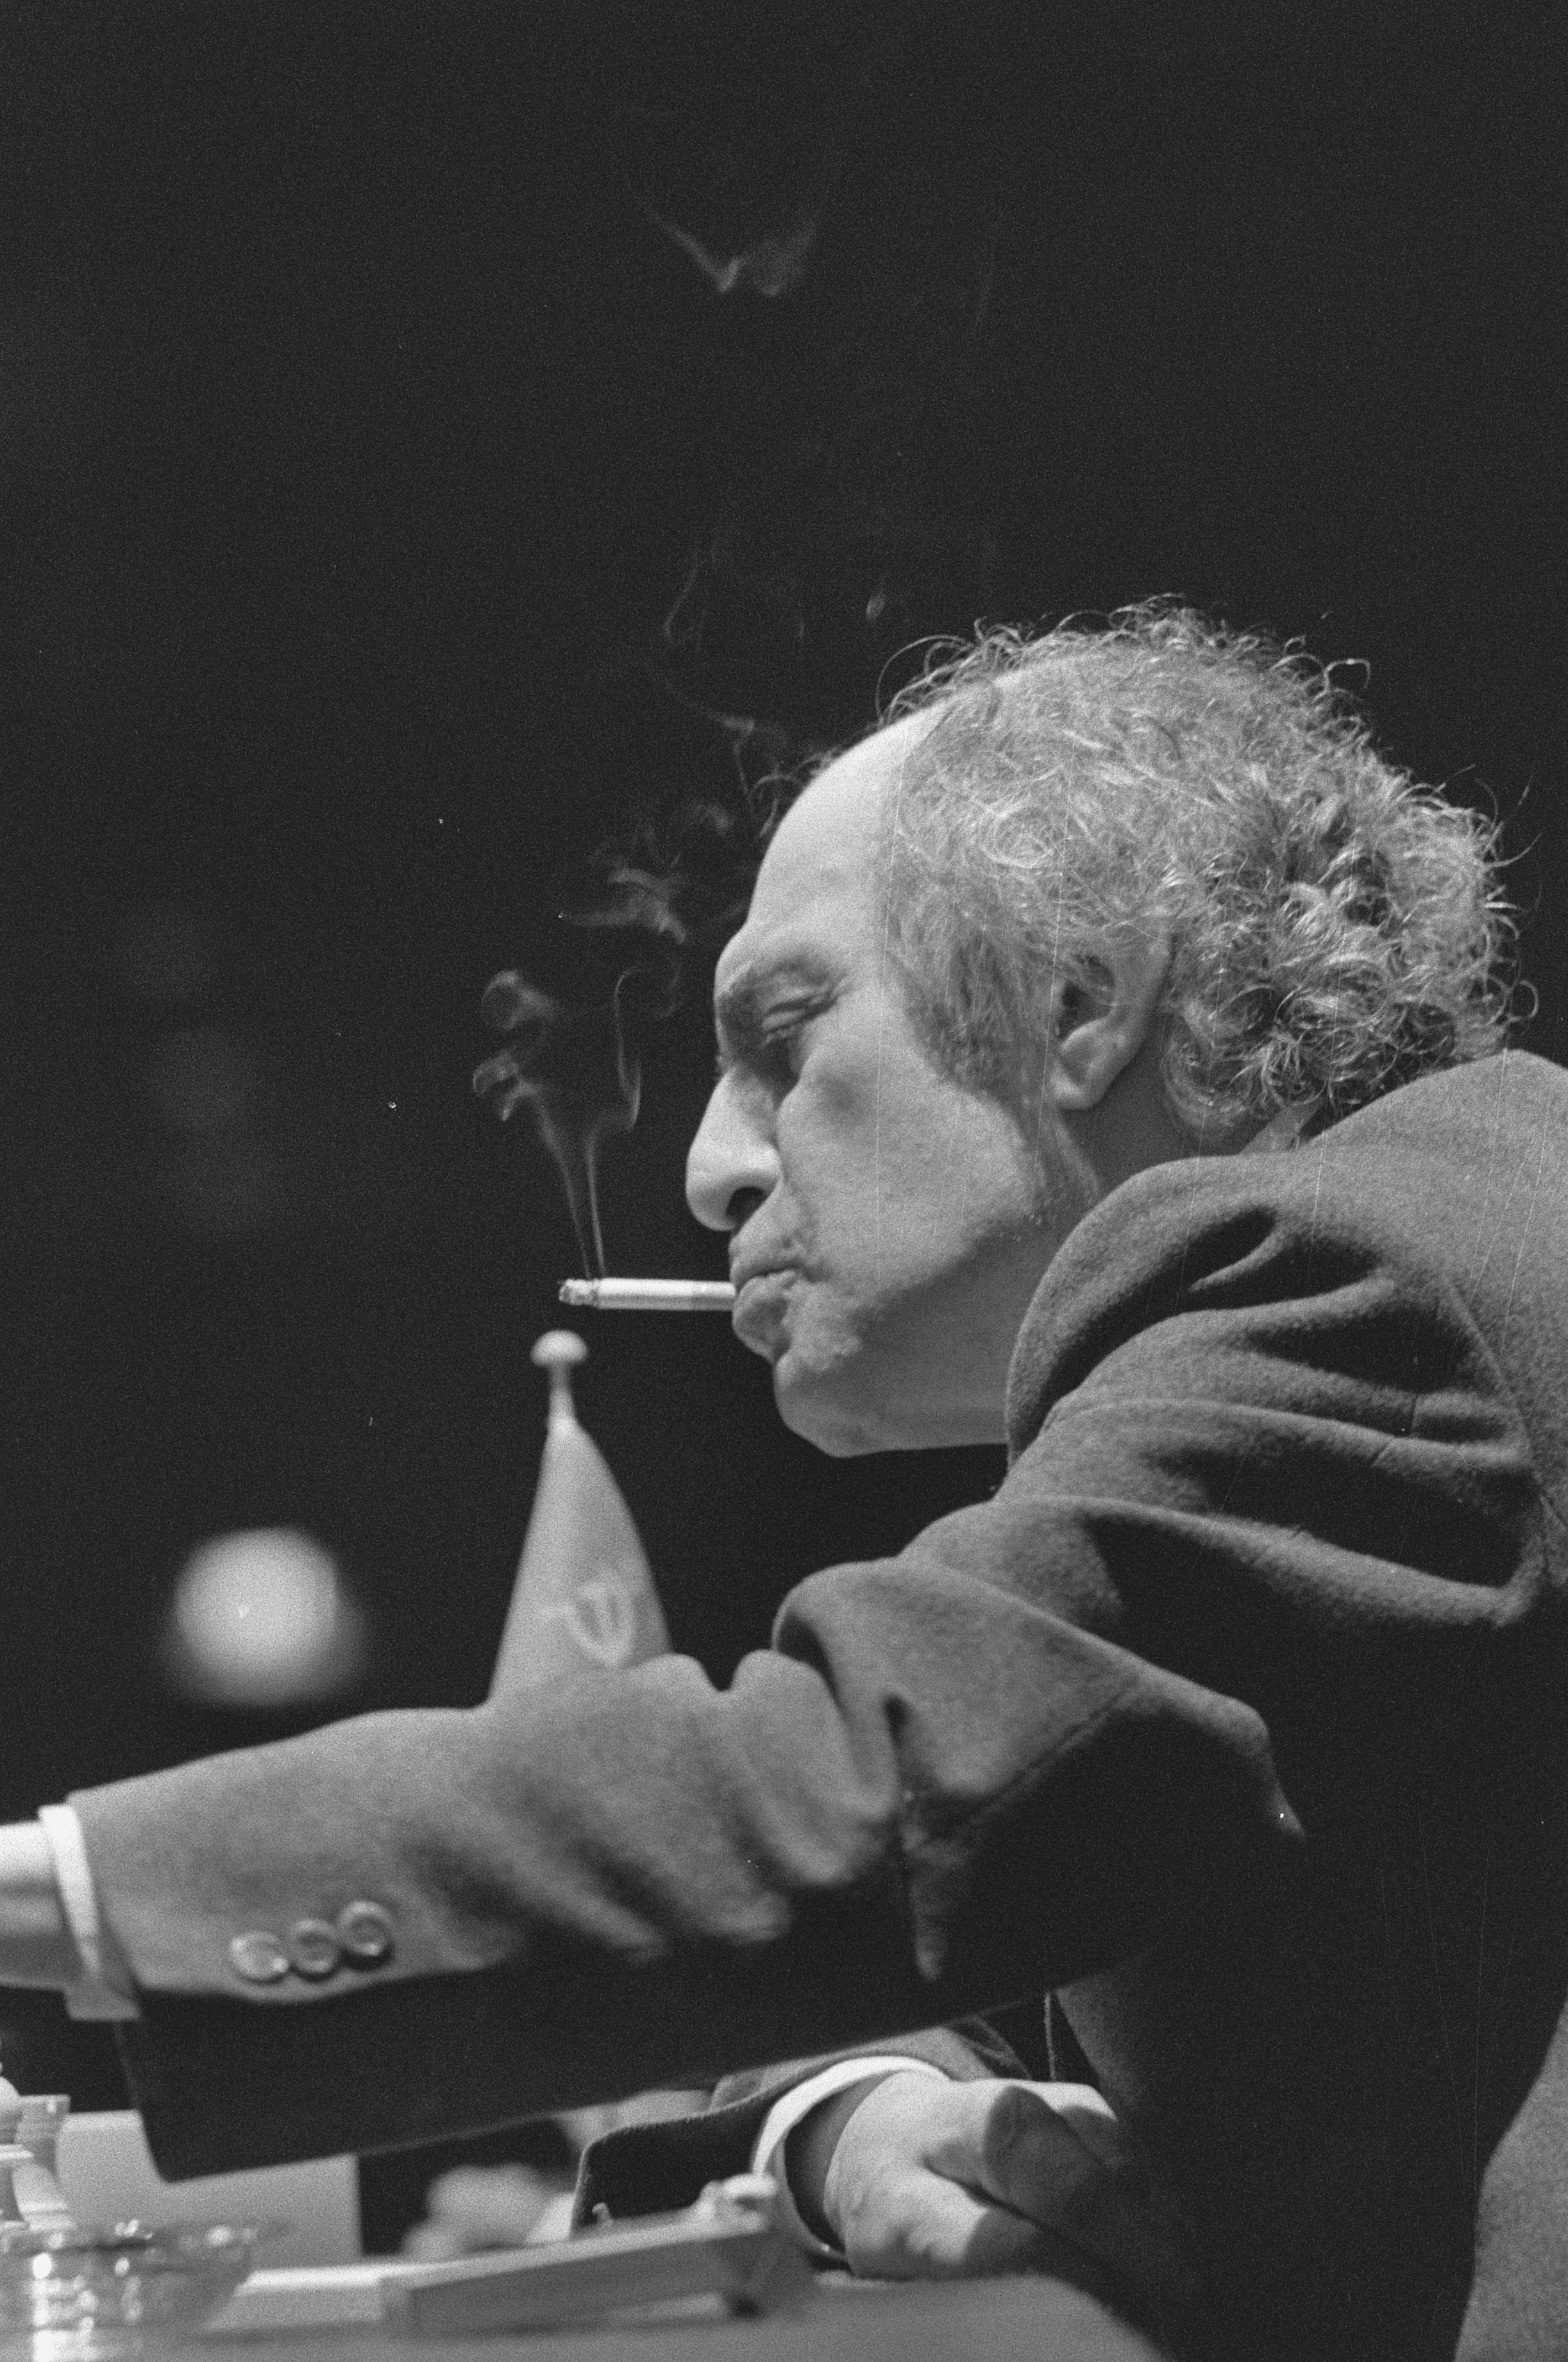 The Life and Games of Mikhail Tal See more